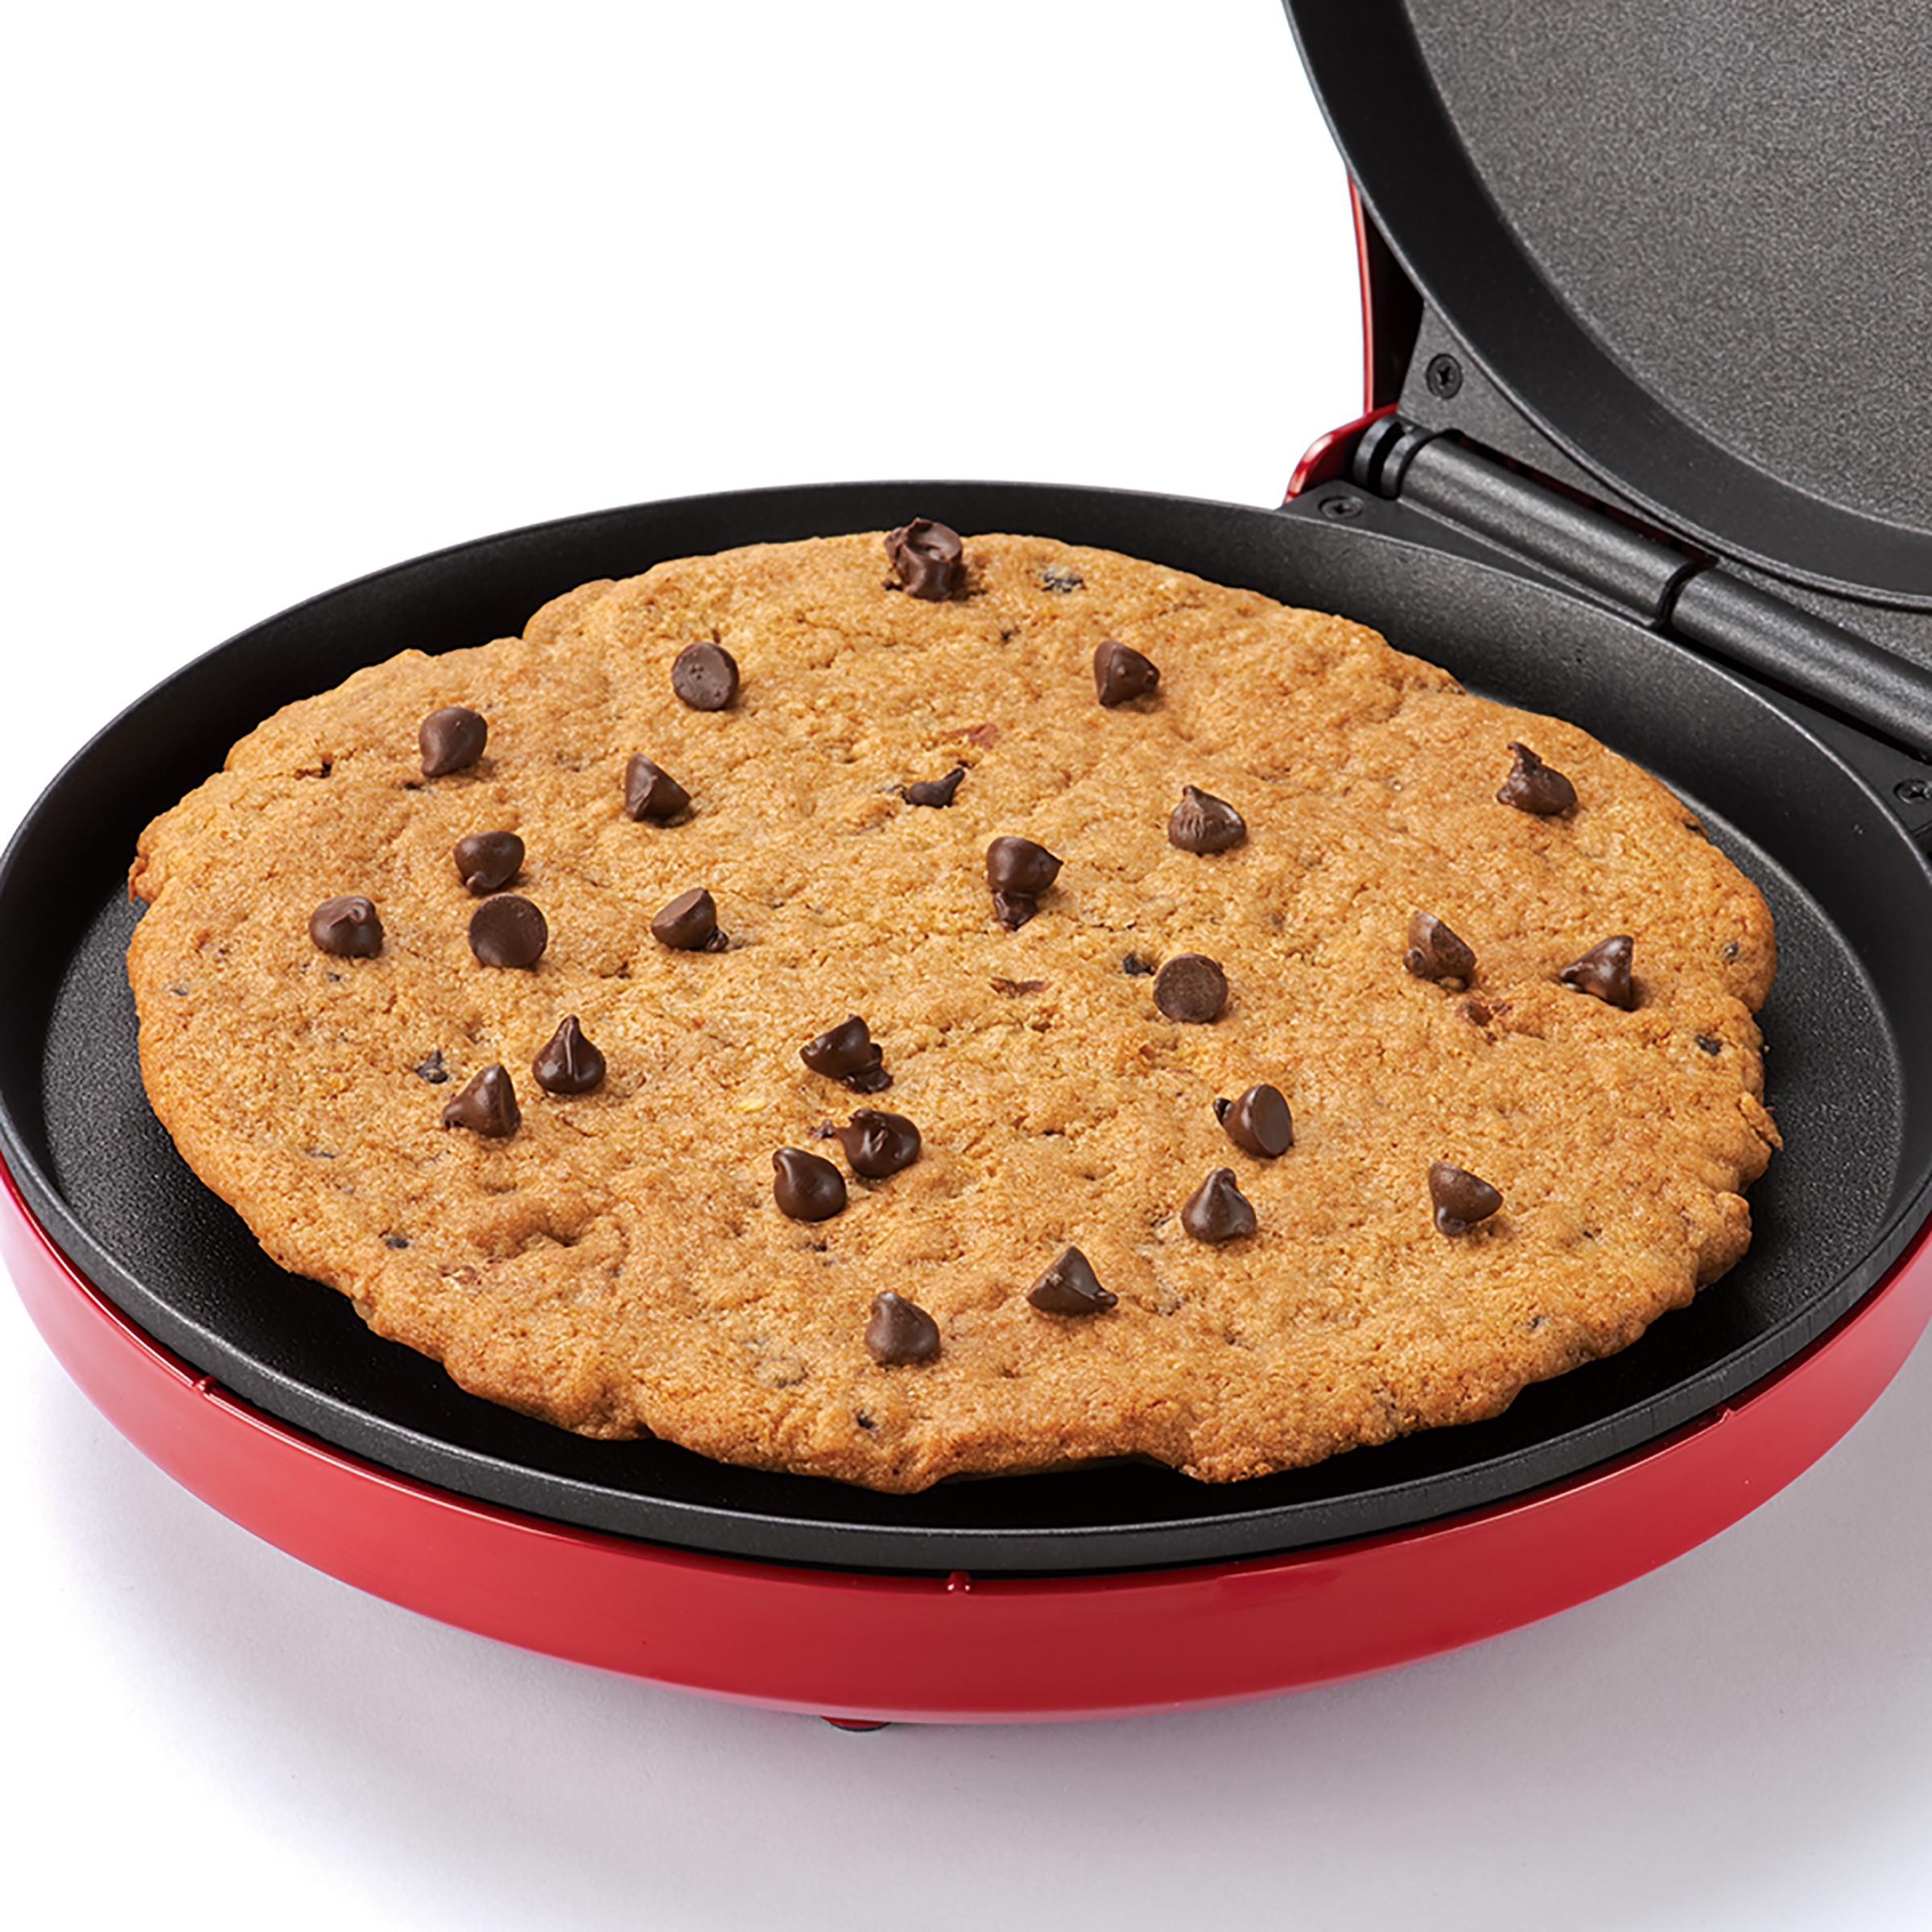 Betty Crocker Pizza Maker Plus, 12" Indoor Electric Grill, Nonstick Griddle Pan for Pizzas, Quesadillas, Tortillas, Nachos and more, 12" Electric Griddle for Delicious Meals and Snacks, Red - image 3 of 5